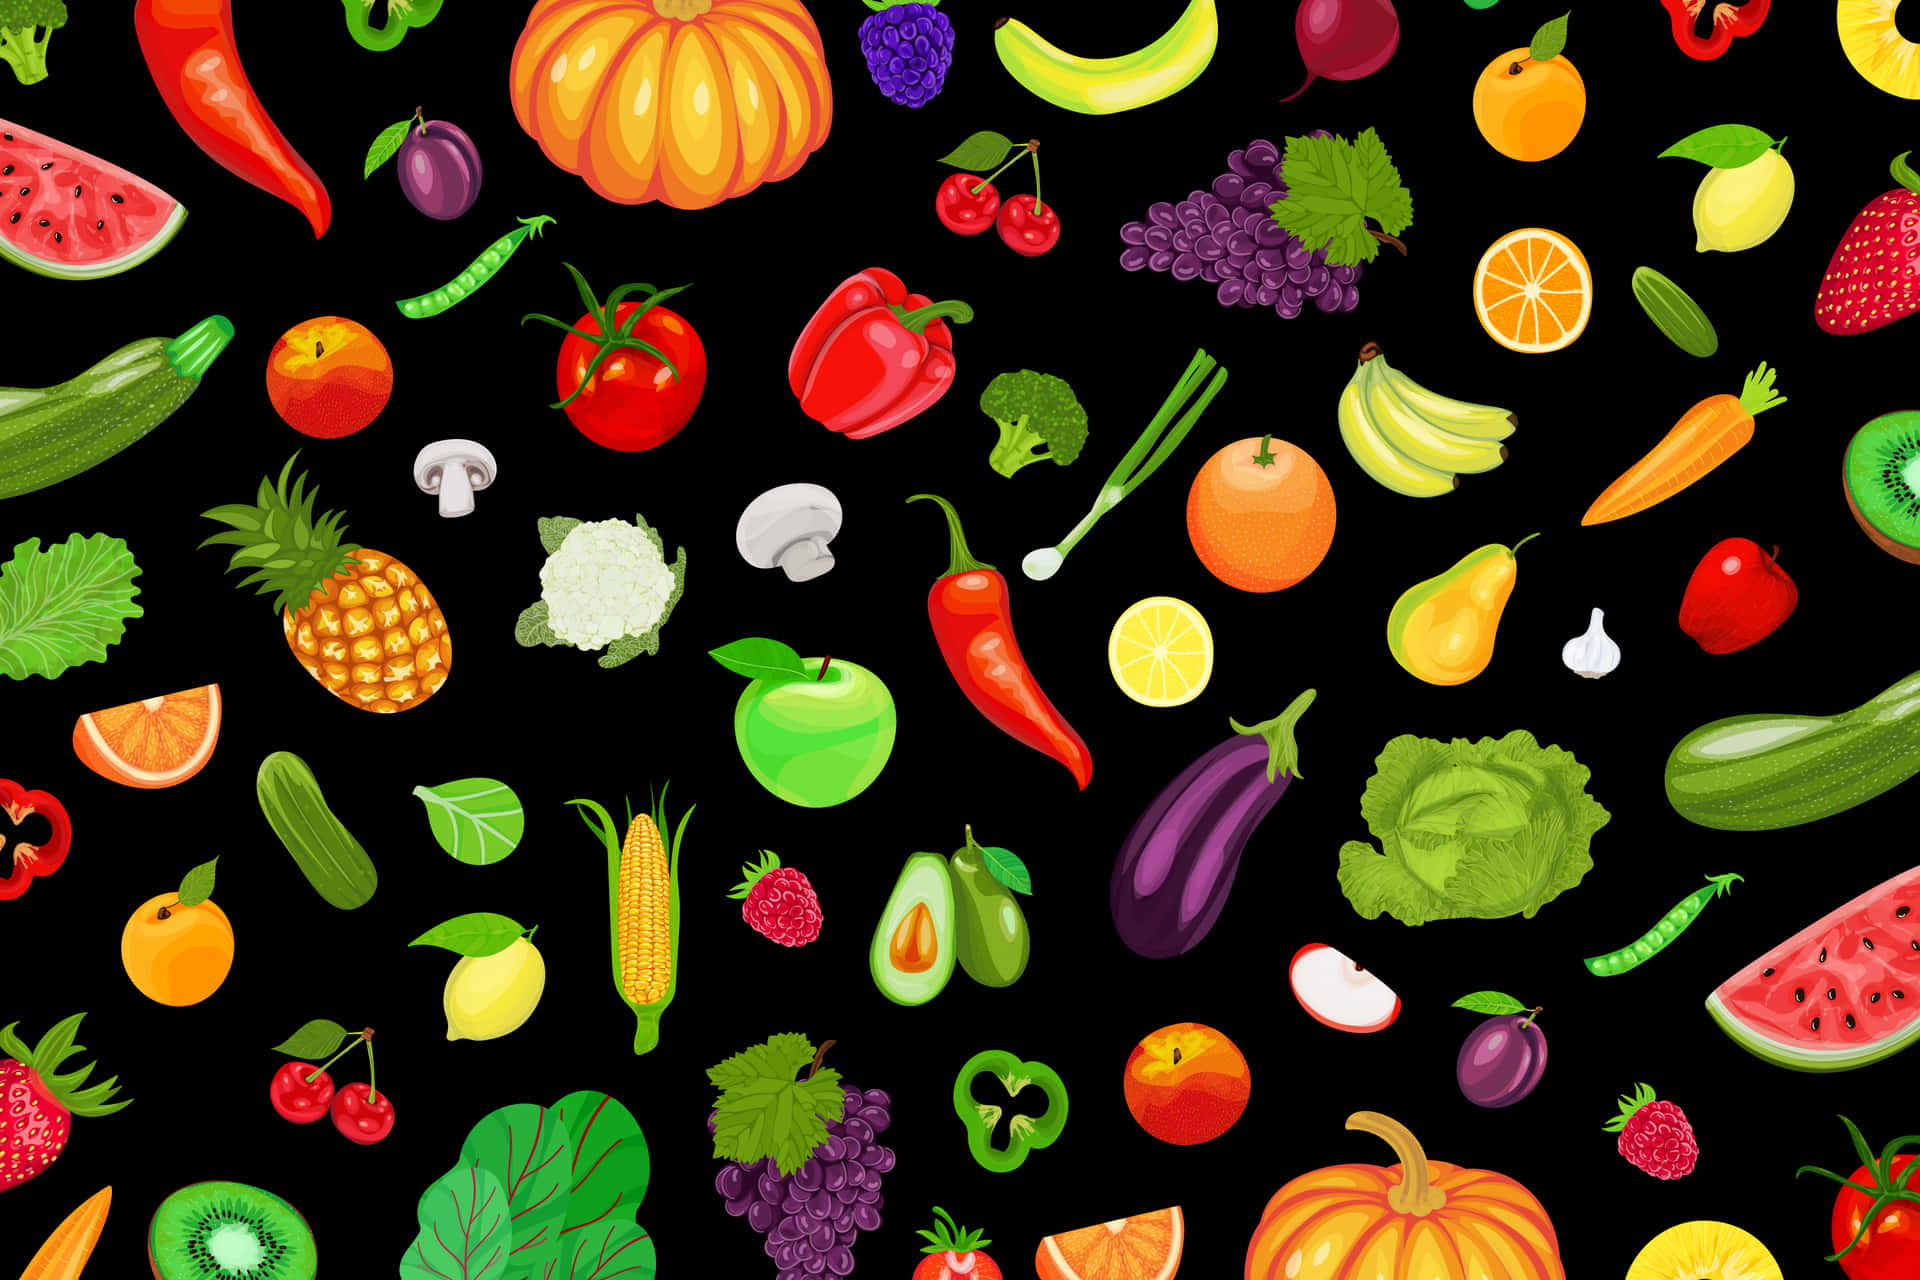 A Seamless Pattern Of Fruits And Vegetables On A Black Background